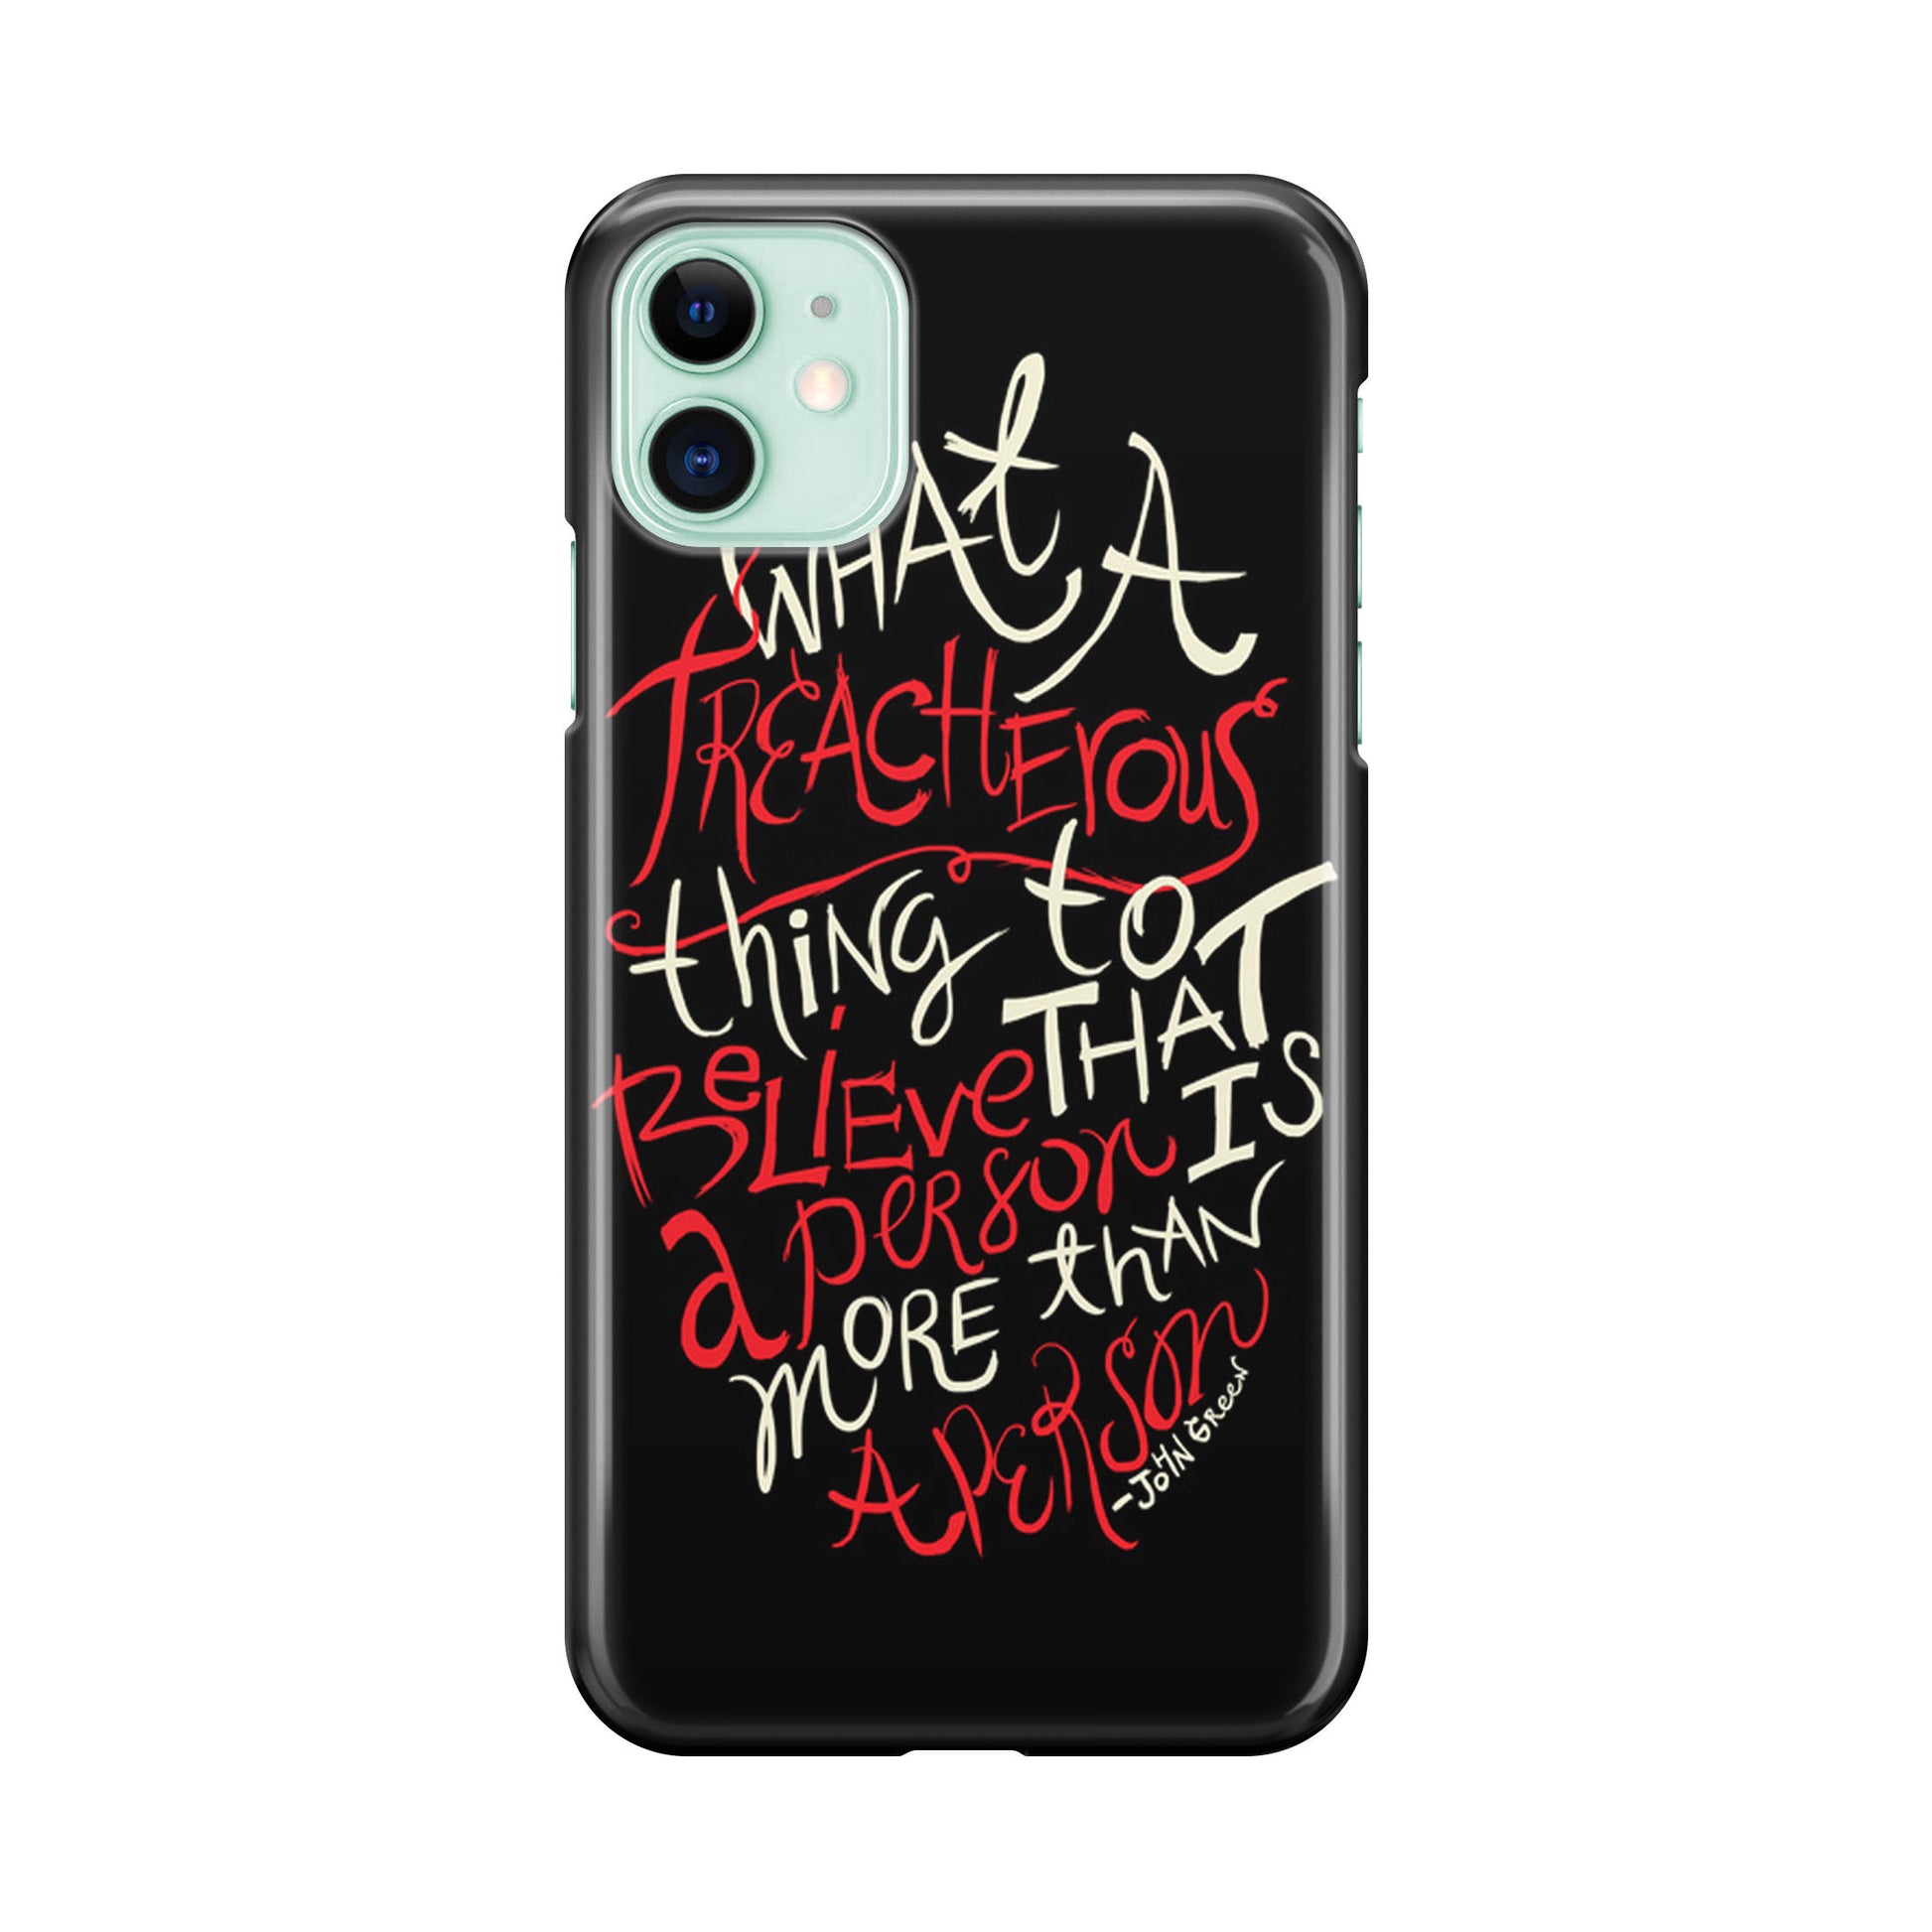 John Green Quotes More Than A Person iPhone 12 Case